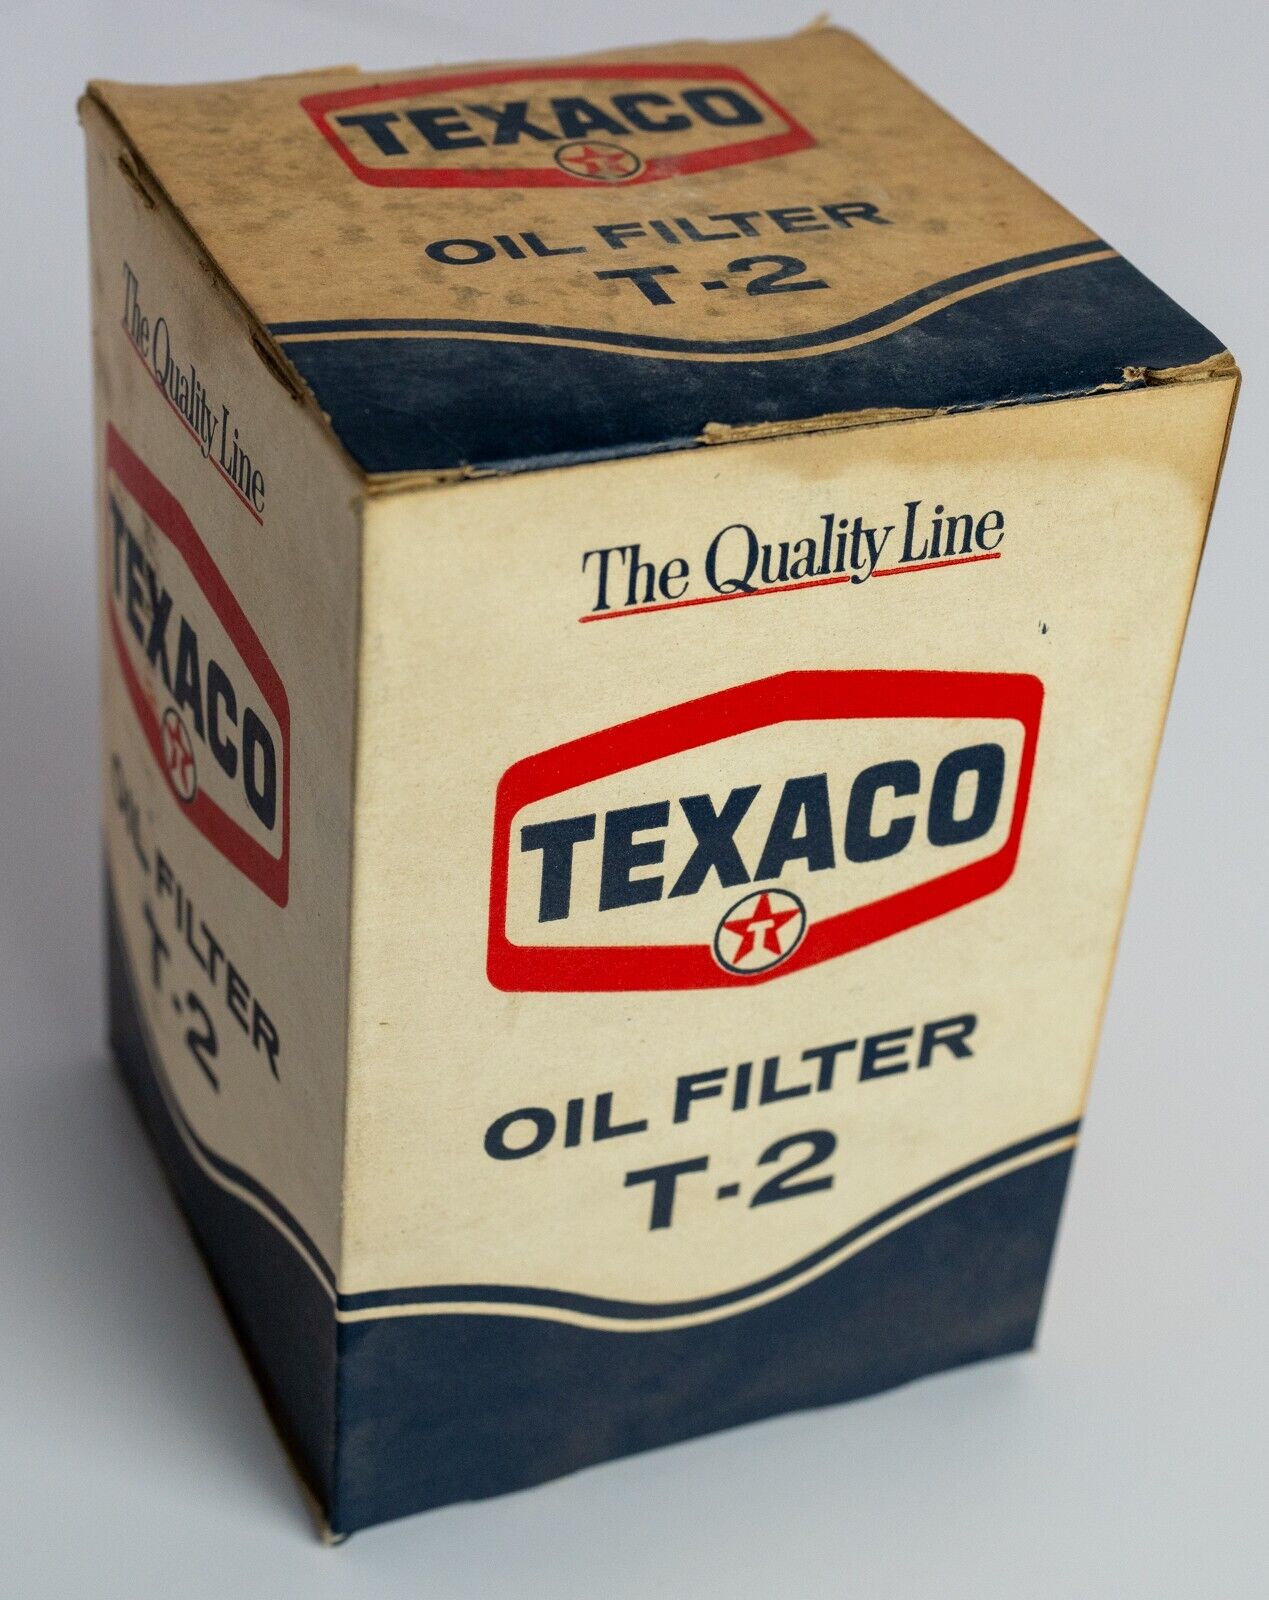 Vintage Texaco Advertising T-2 (T 2) Oil Filter With Box , New Old Stock